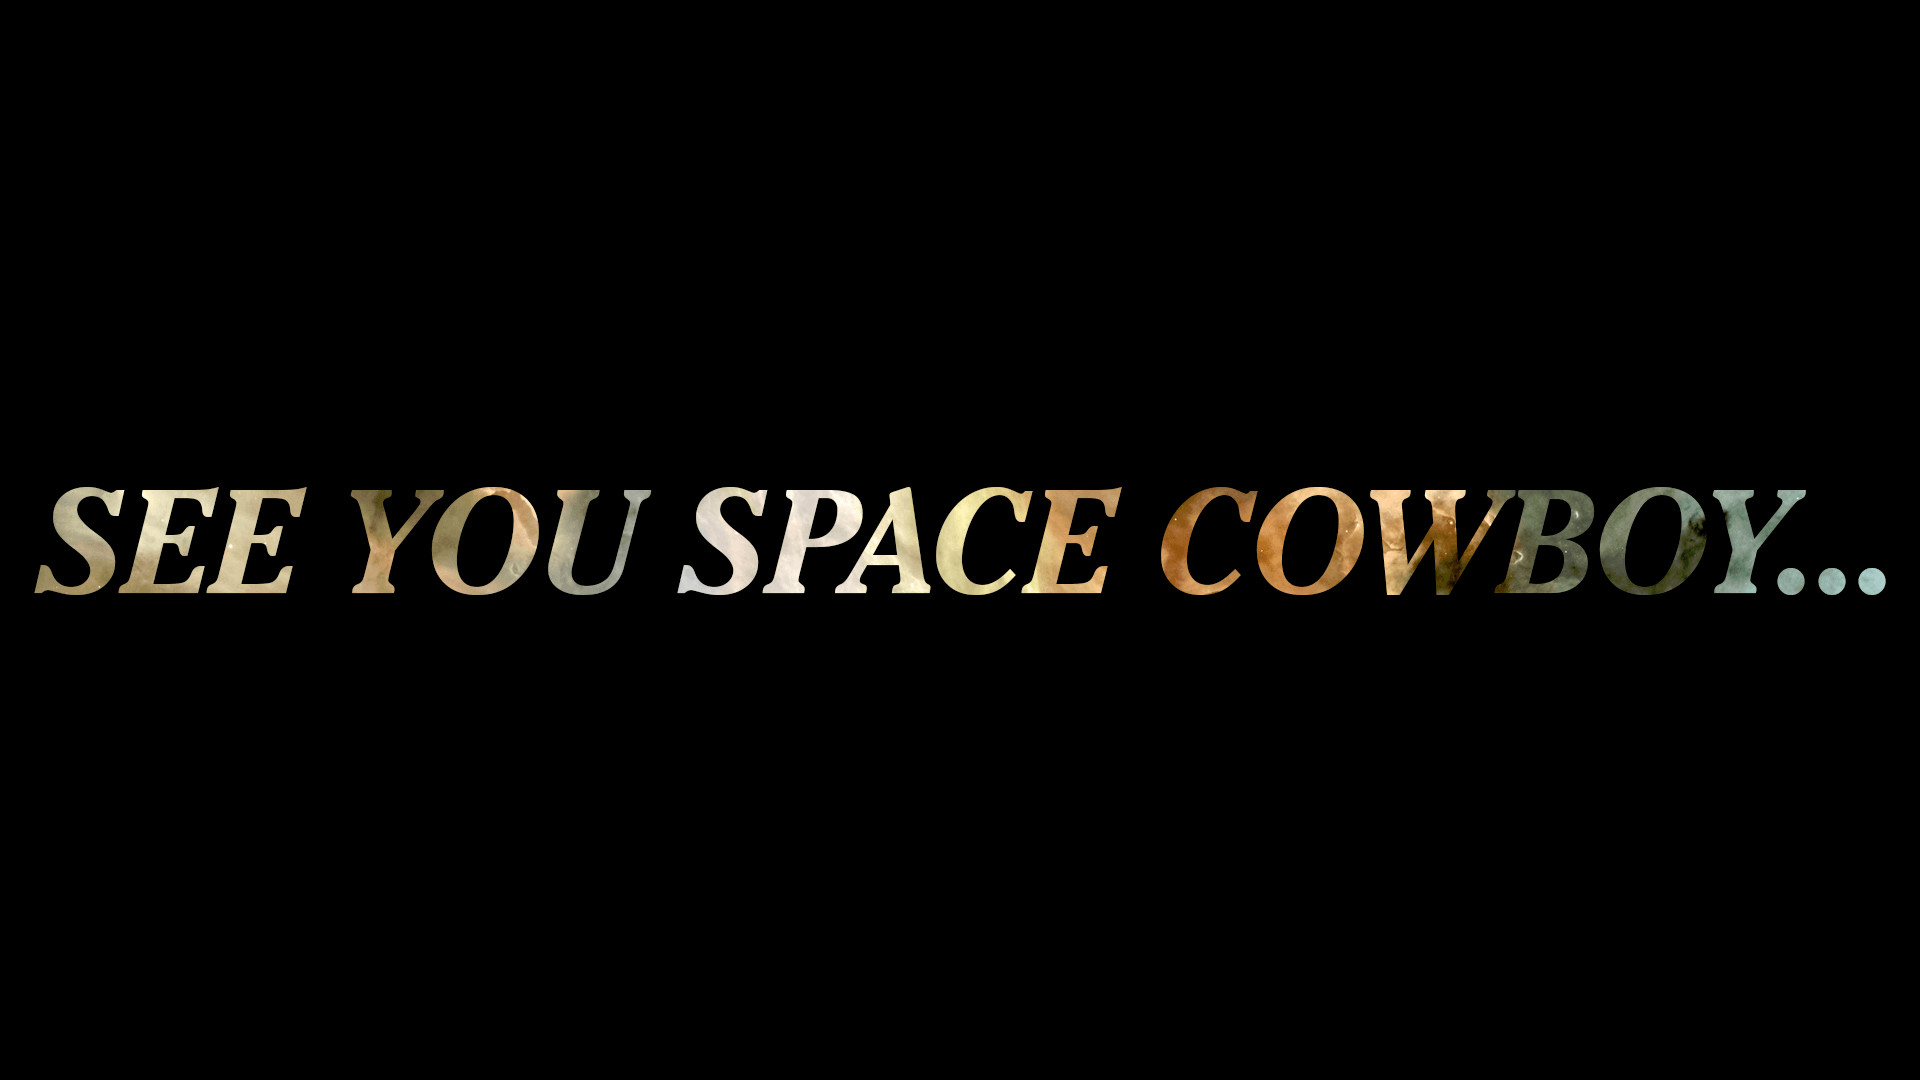 See you second. See you Space Cowboy. Ковбой Бибоп see you Space Cowboy. See you Space Cowboy обои. See you in Space Cowboy.